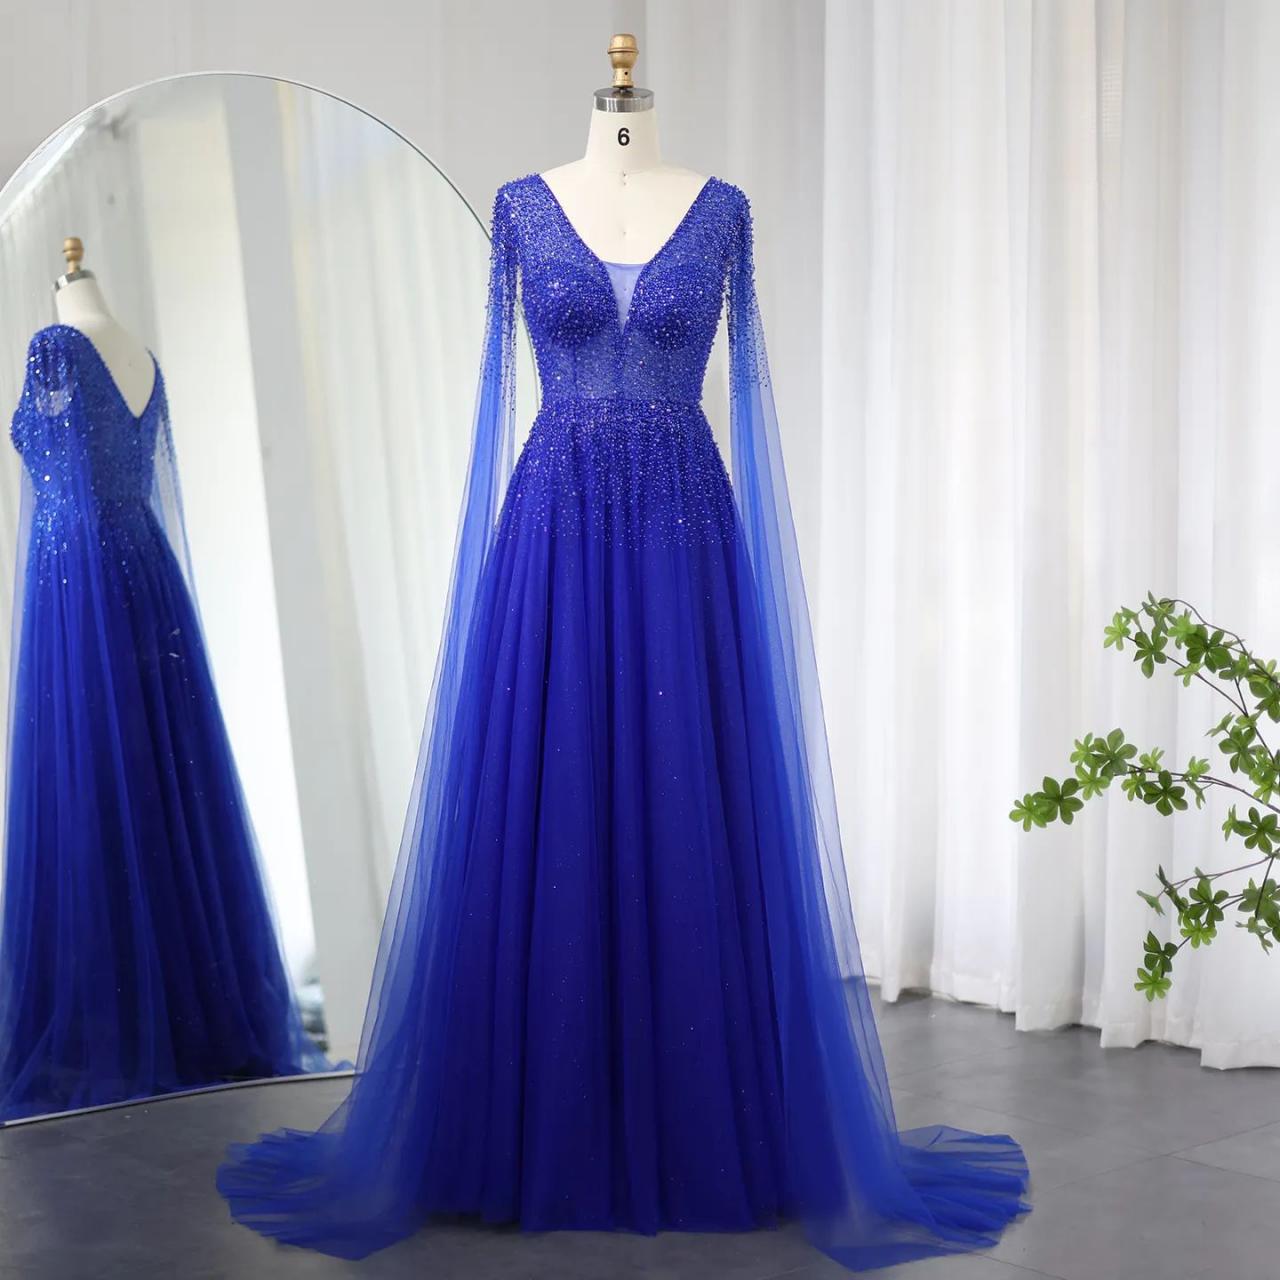 Royal Blue Luxury Dubai Evening Dress With Cape Sleeves Elegant Pink V-neck Purple Women Wedding Party Gowns